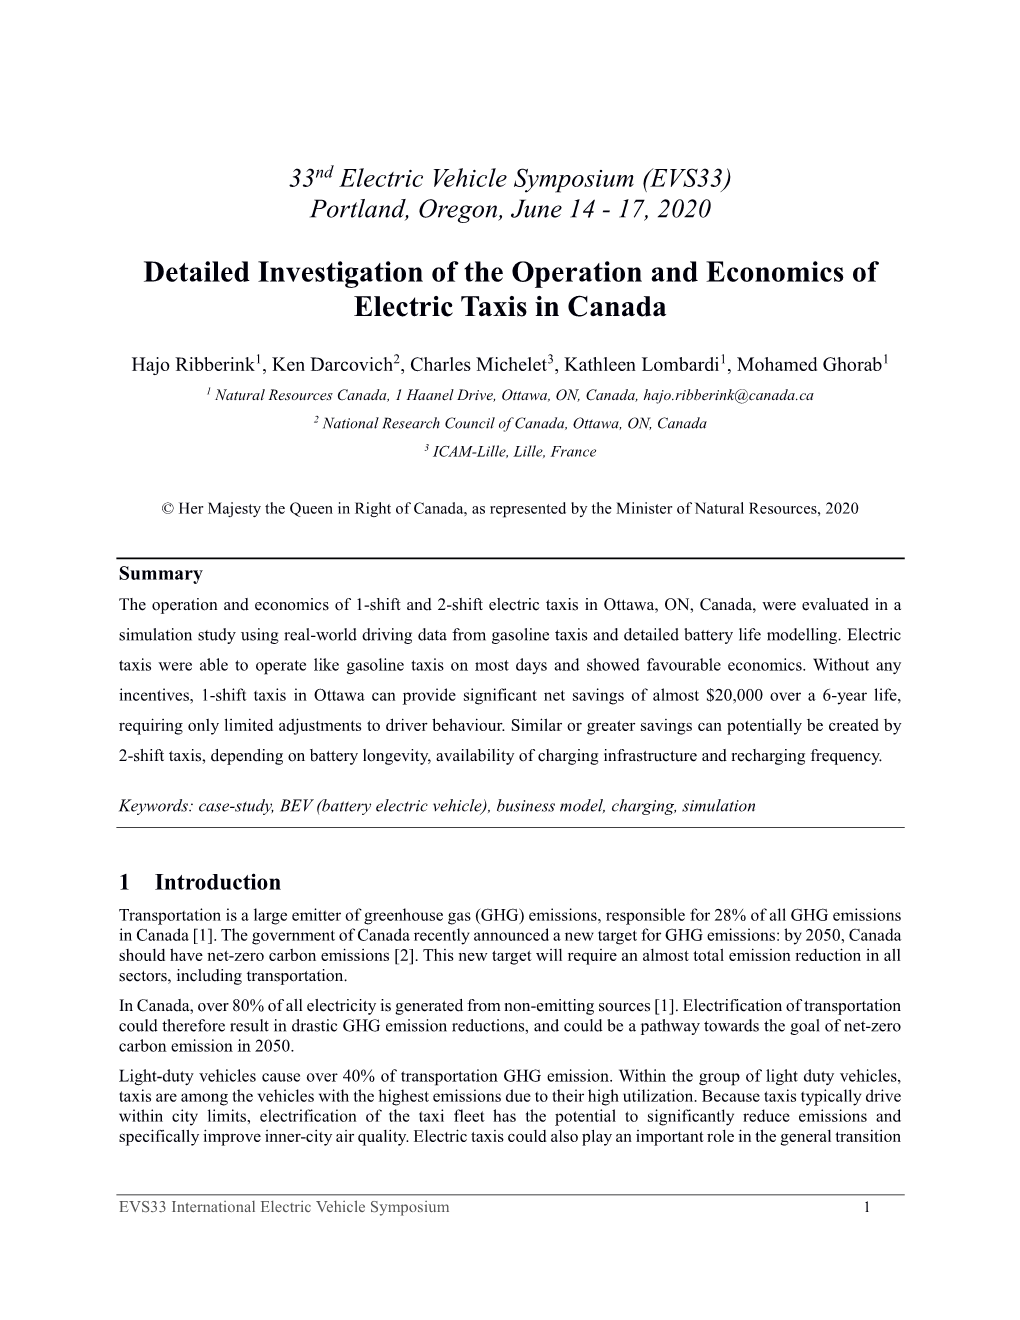 Detailed Investigation of the Operation and Economics of Electric Taxis in Canada